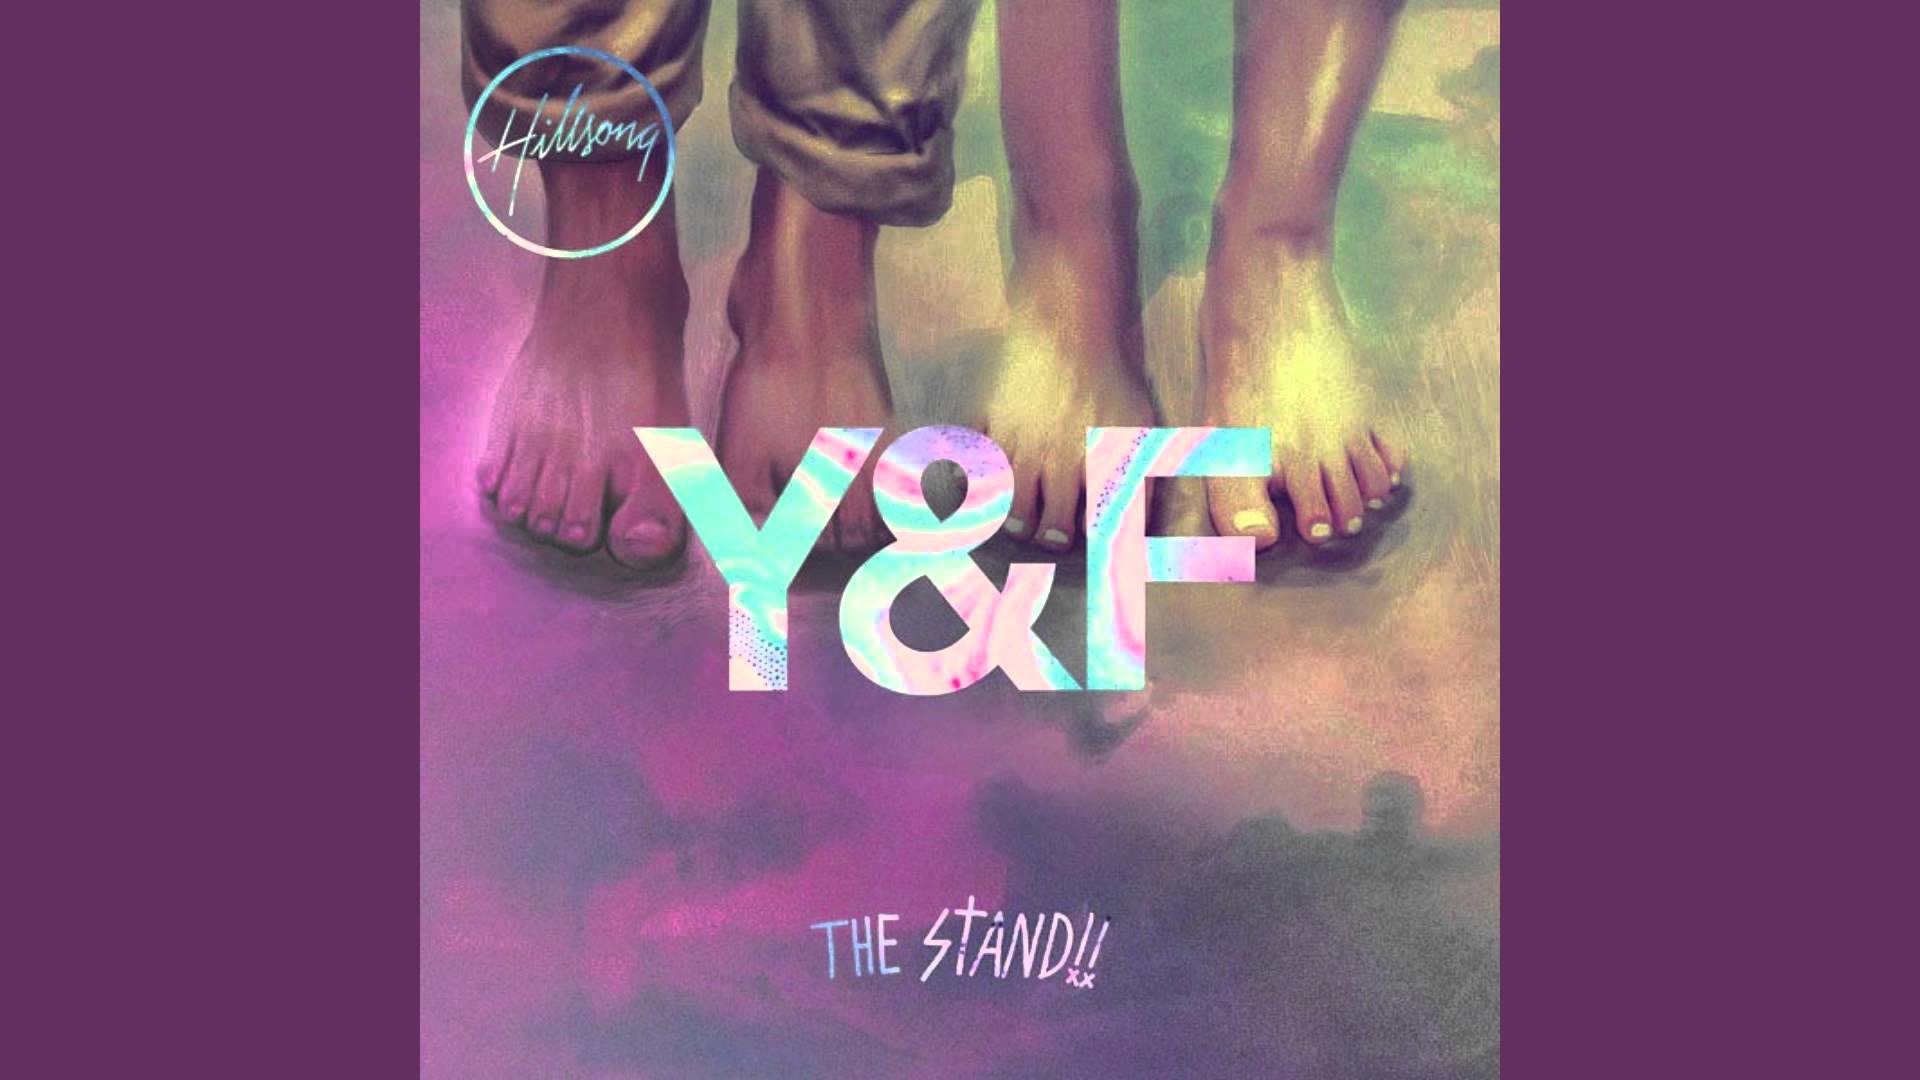 1920x1080 Hillsong Young & Free - The Stand (Single/Remix) - YouTube